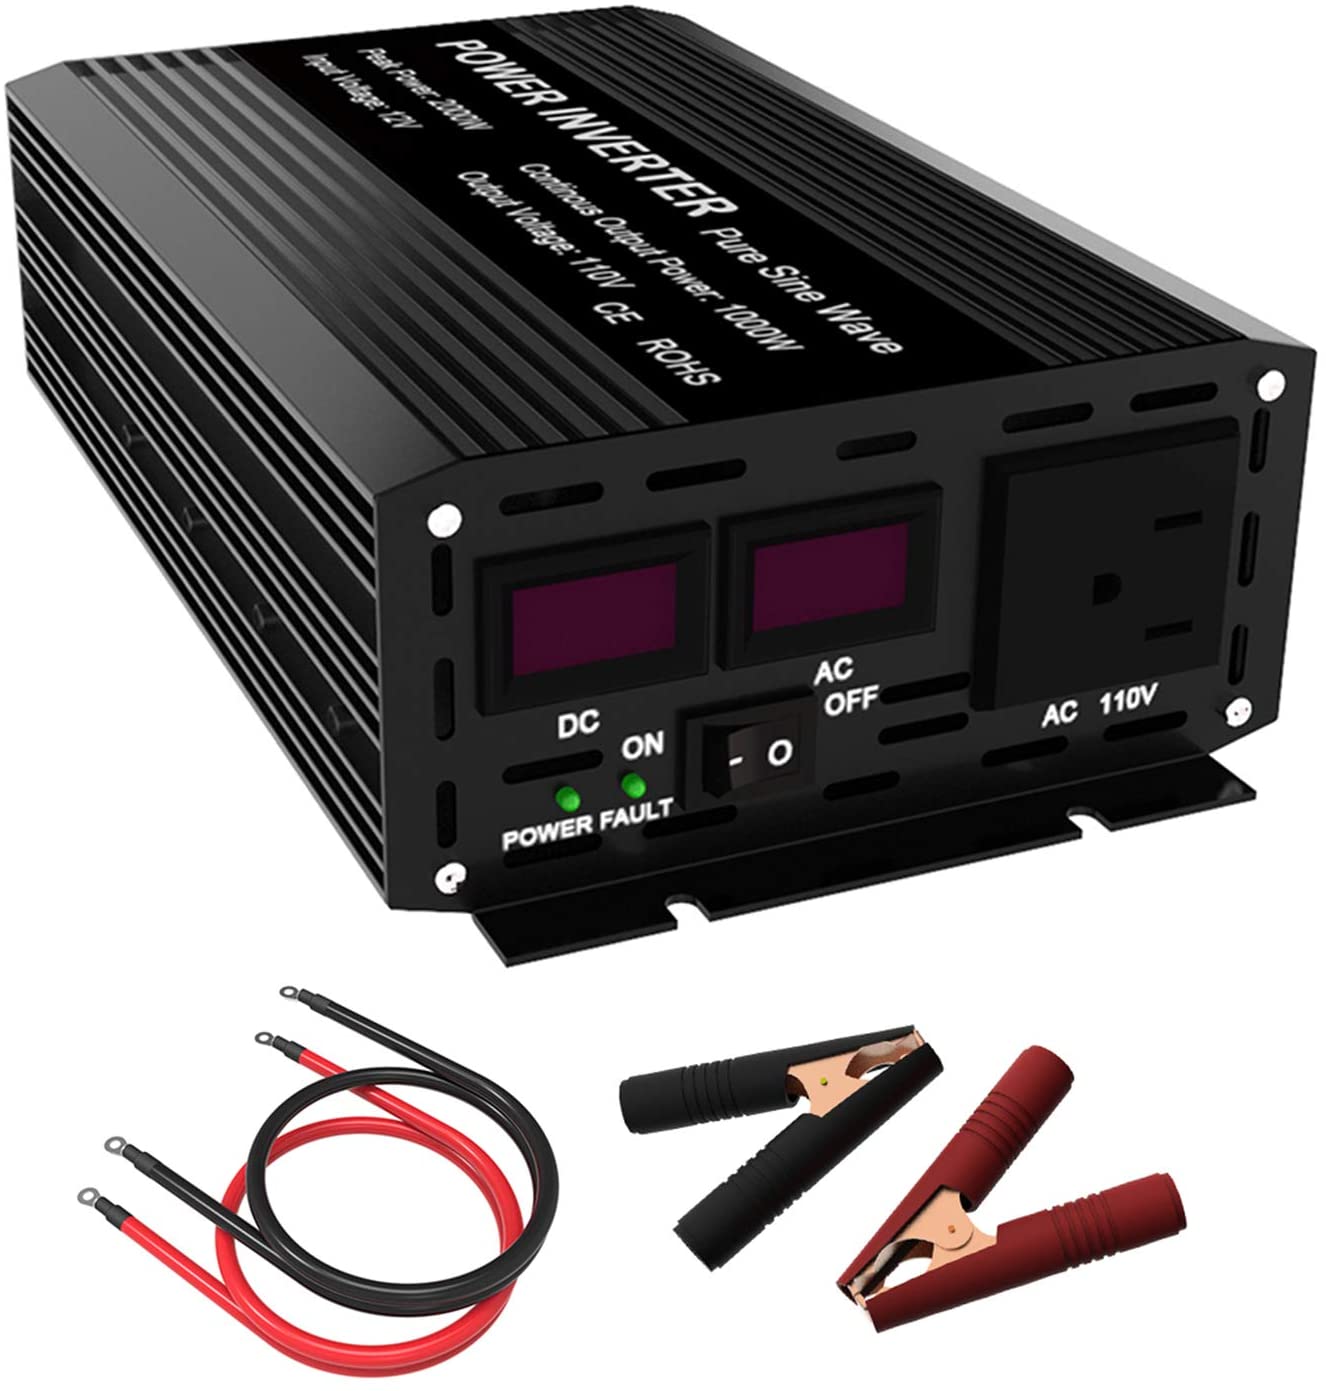 SHIERLENG 1000W Pure Sine Wave Power Inverter Review